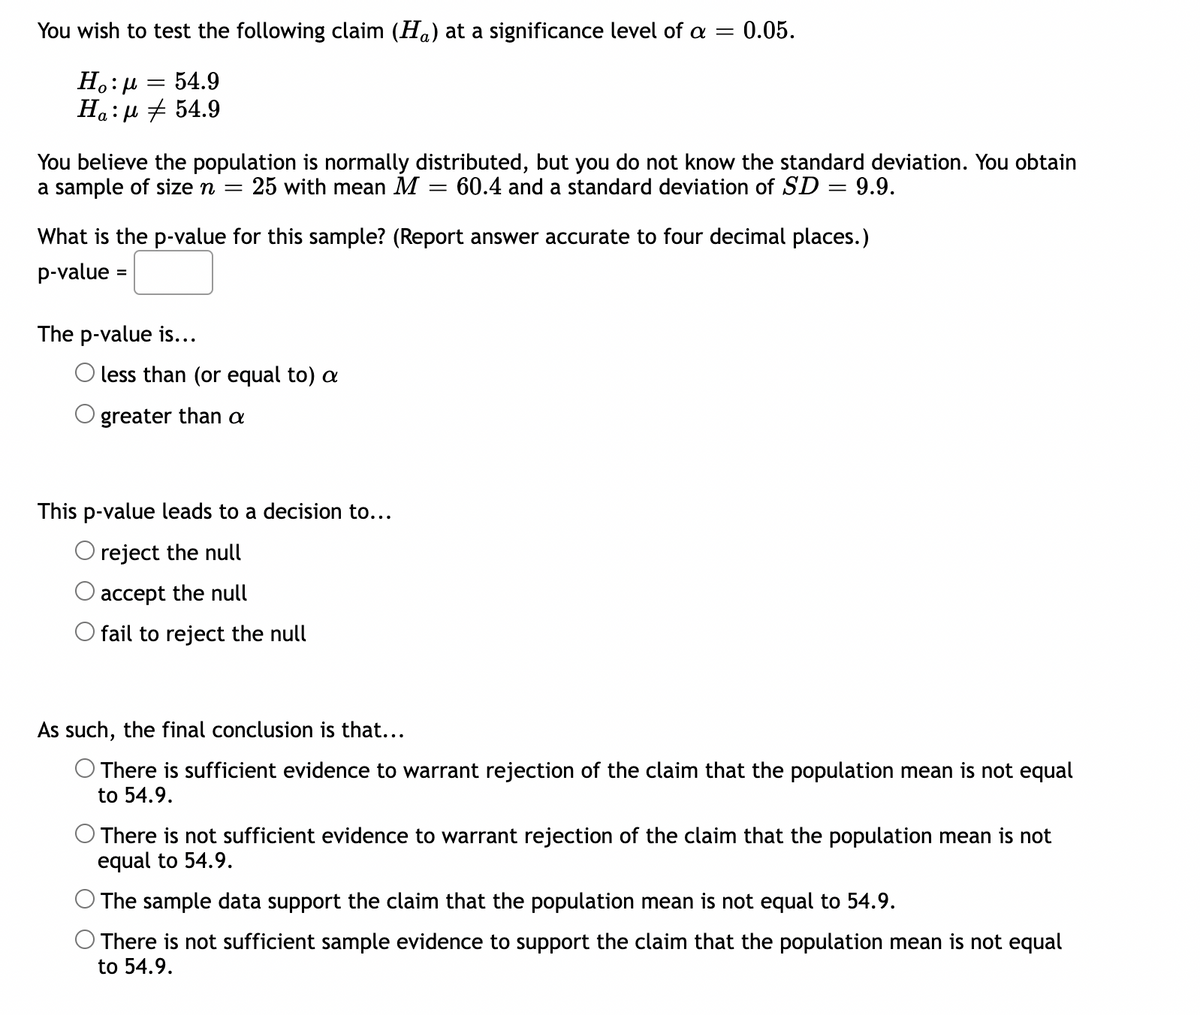 You wish to test the following claim (Ha) at a significance level of a = 0.05.
Ho:μ 54.9
Ha:μ # 54.9
You believe the population is normally distributed, but you do not know the standard deviation. You obtain
a sample of size n = 25 with mean M 60.4 and a standard deviation of SD = 9.9.
=
What is the p-value for this sample? (Report answer accurate to four decimal places.)
p-value =
The p-value is...
less than (or equal to) a
greater than a
This p-value leads to a decision to...
O reject the null
accept the null
fail to reject the null
As such, the final conclusion is that...
There is sufficient evidence to warrant rejection of the claim that the population mean is not equal
to 54.9.
O There is not sufficient evidence to warrant rejection of the claim that the population mean is not
equal to 54.9.
The sample data support the claim that the population mean is not equal to 54.9.
There is not sufficient sample evidence to support the claim that the population mean is not equal
to 54.9